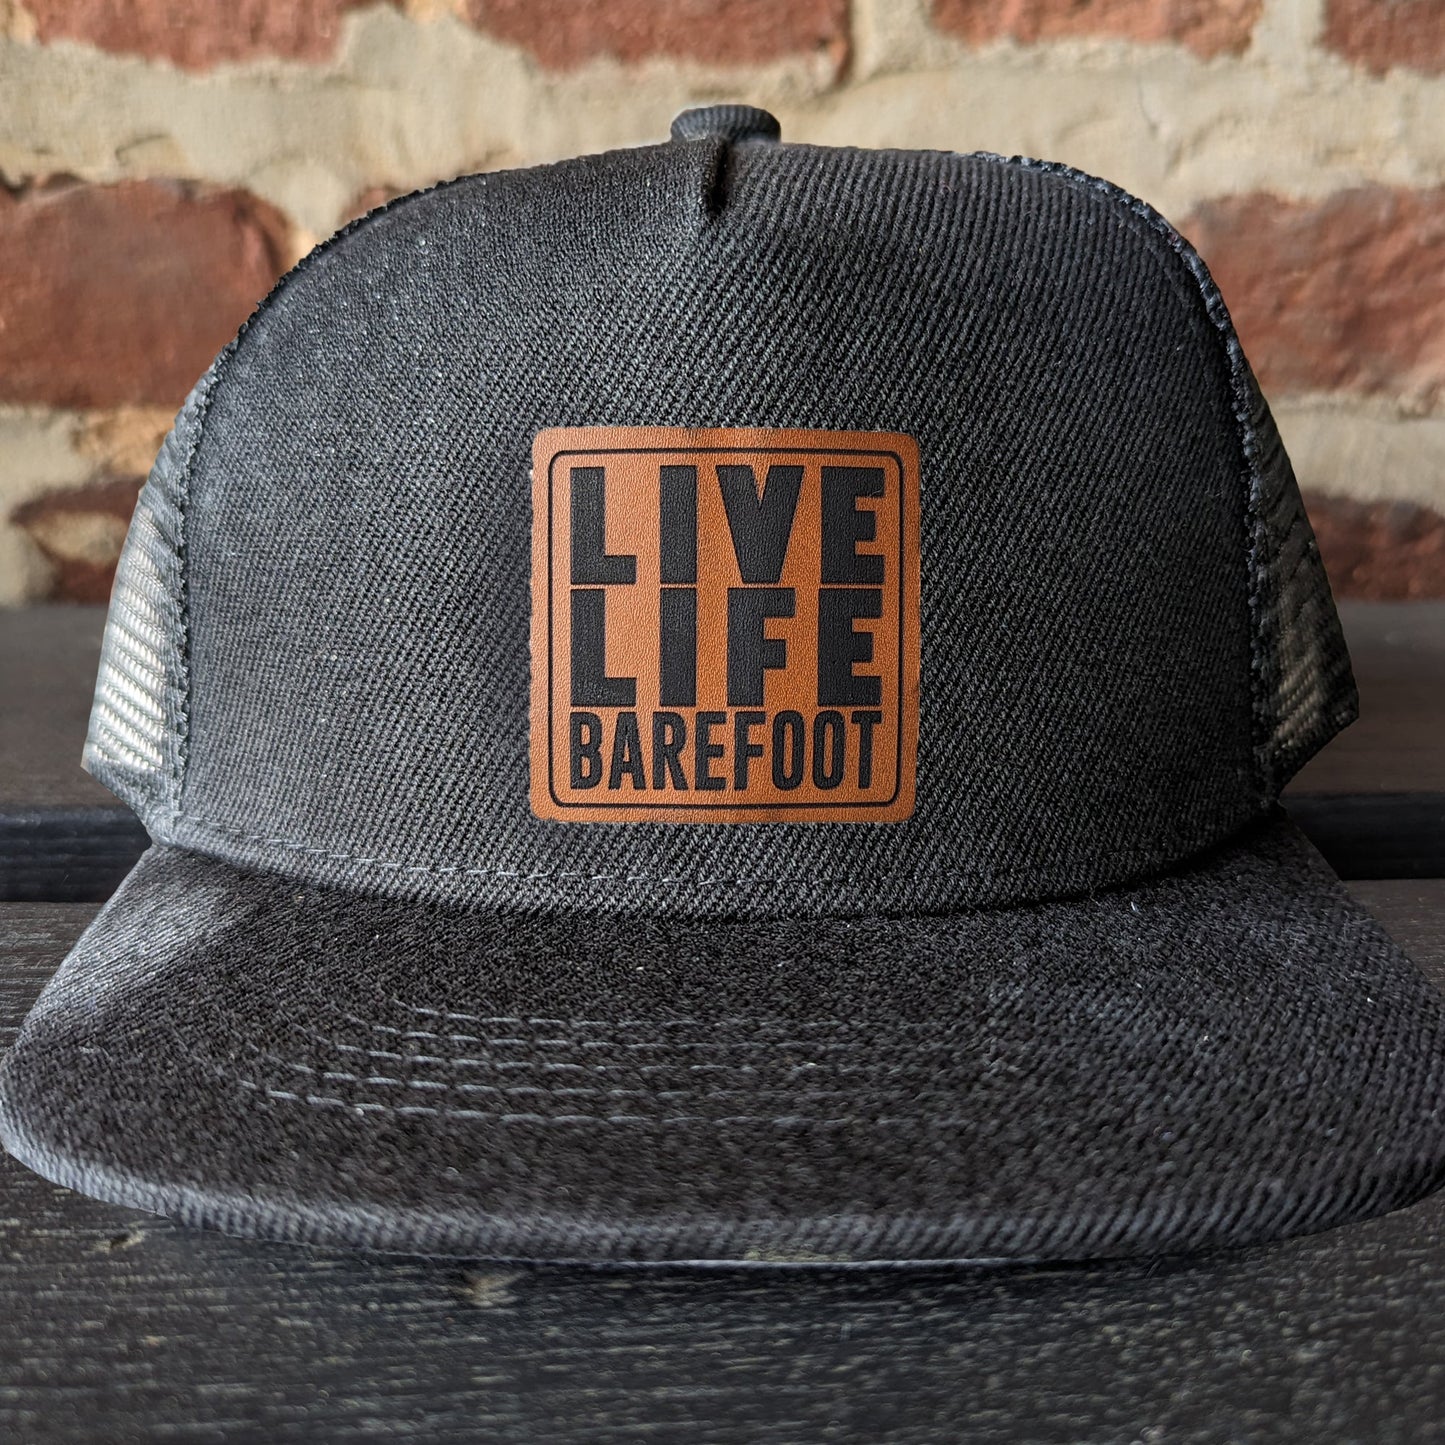 "Live Life Barefoot" Mesh Back Trucker Hat | Youth Size | FOUR Color Options